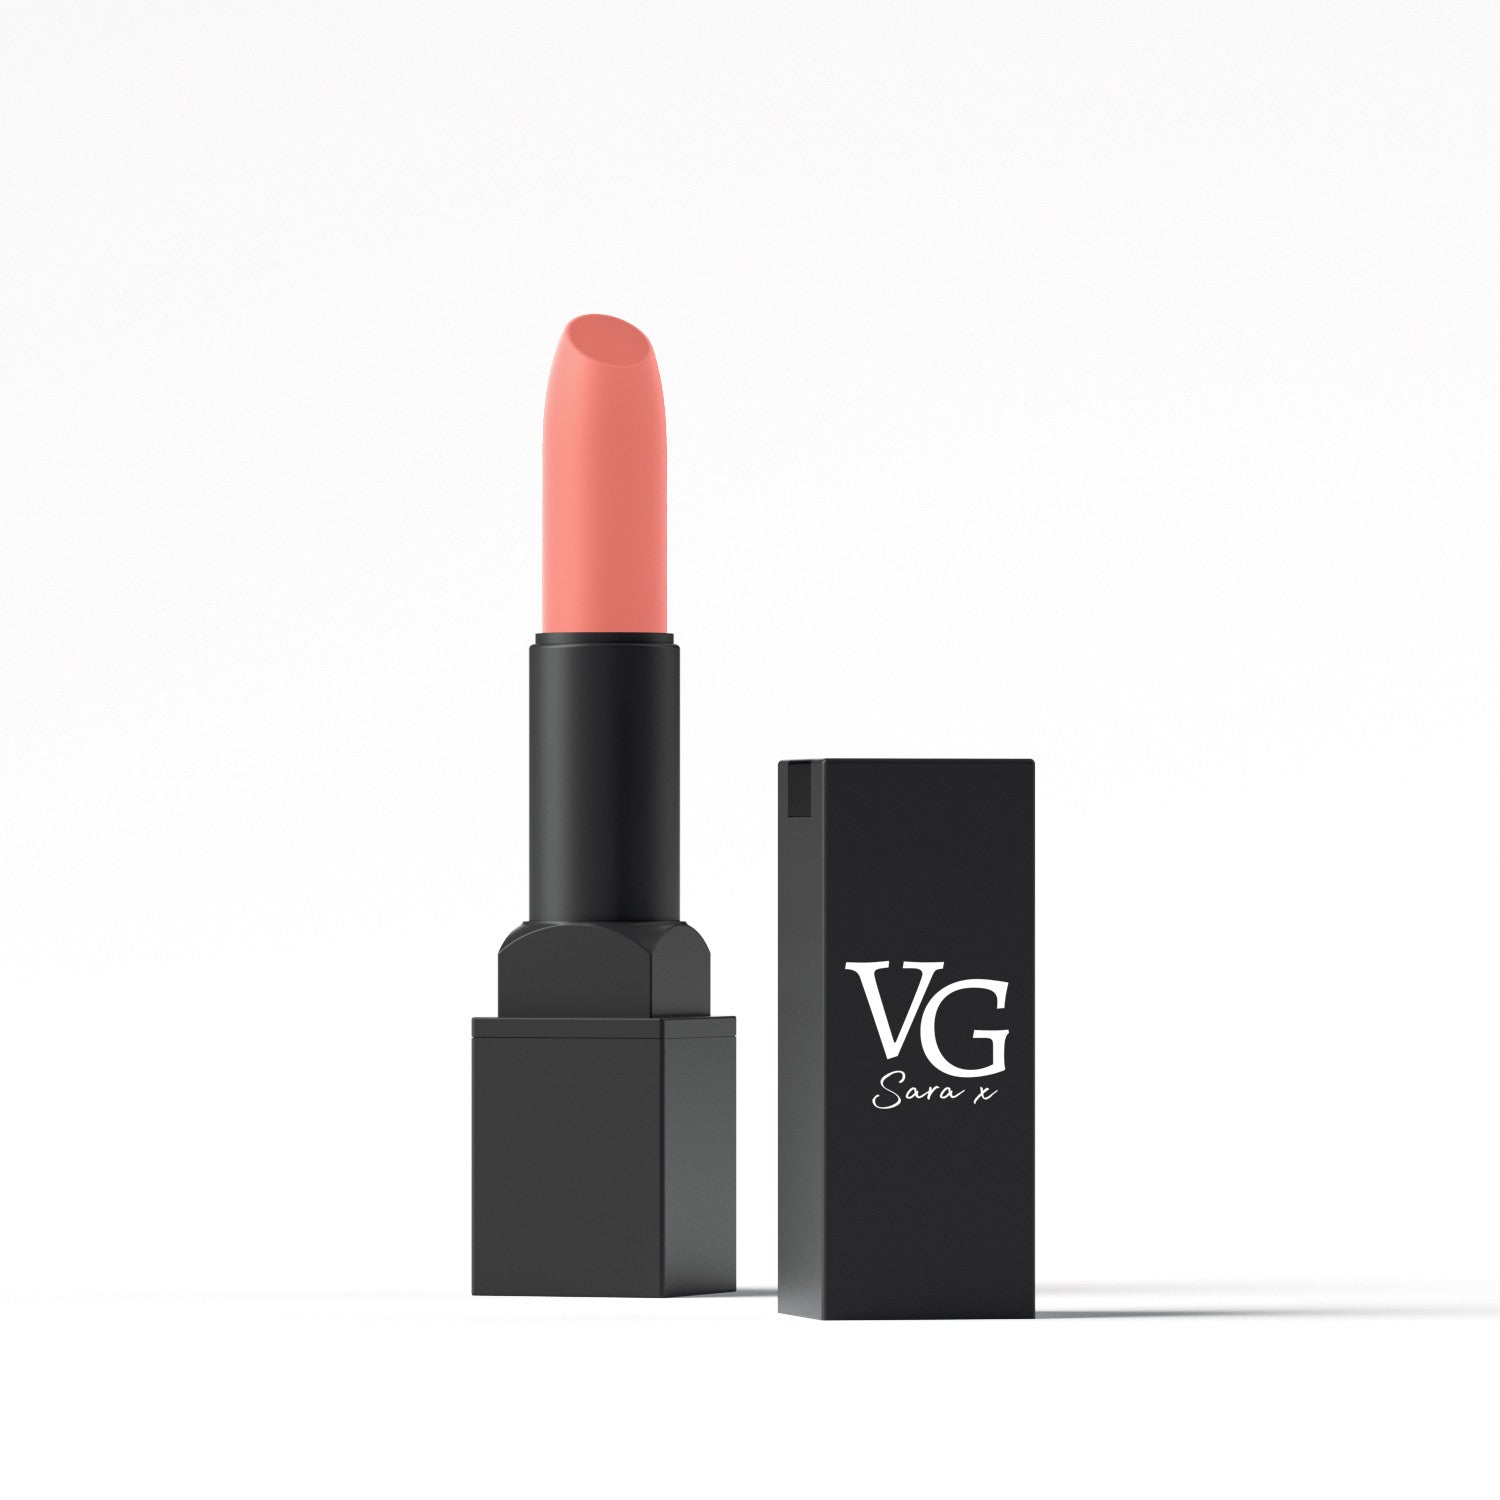 VG Long Lasting lipstick featuring the VG logo on the casing